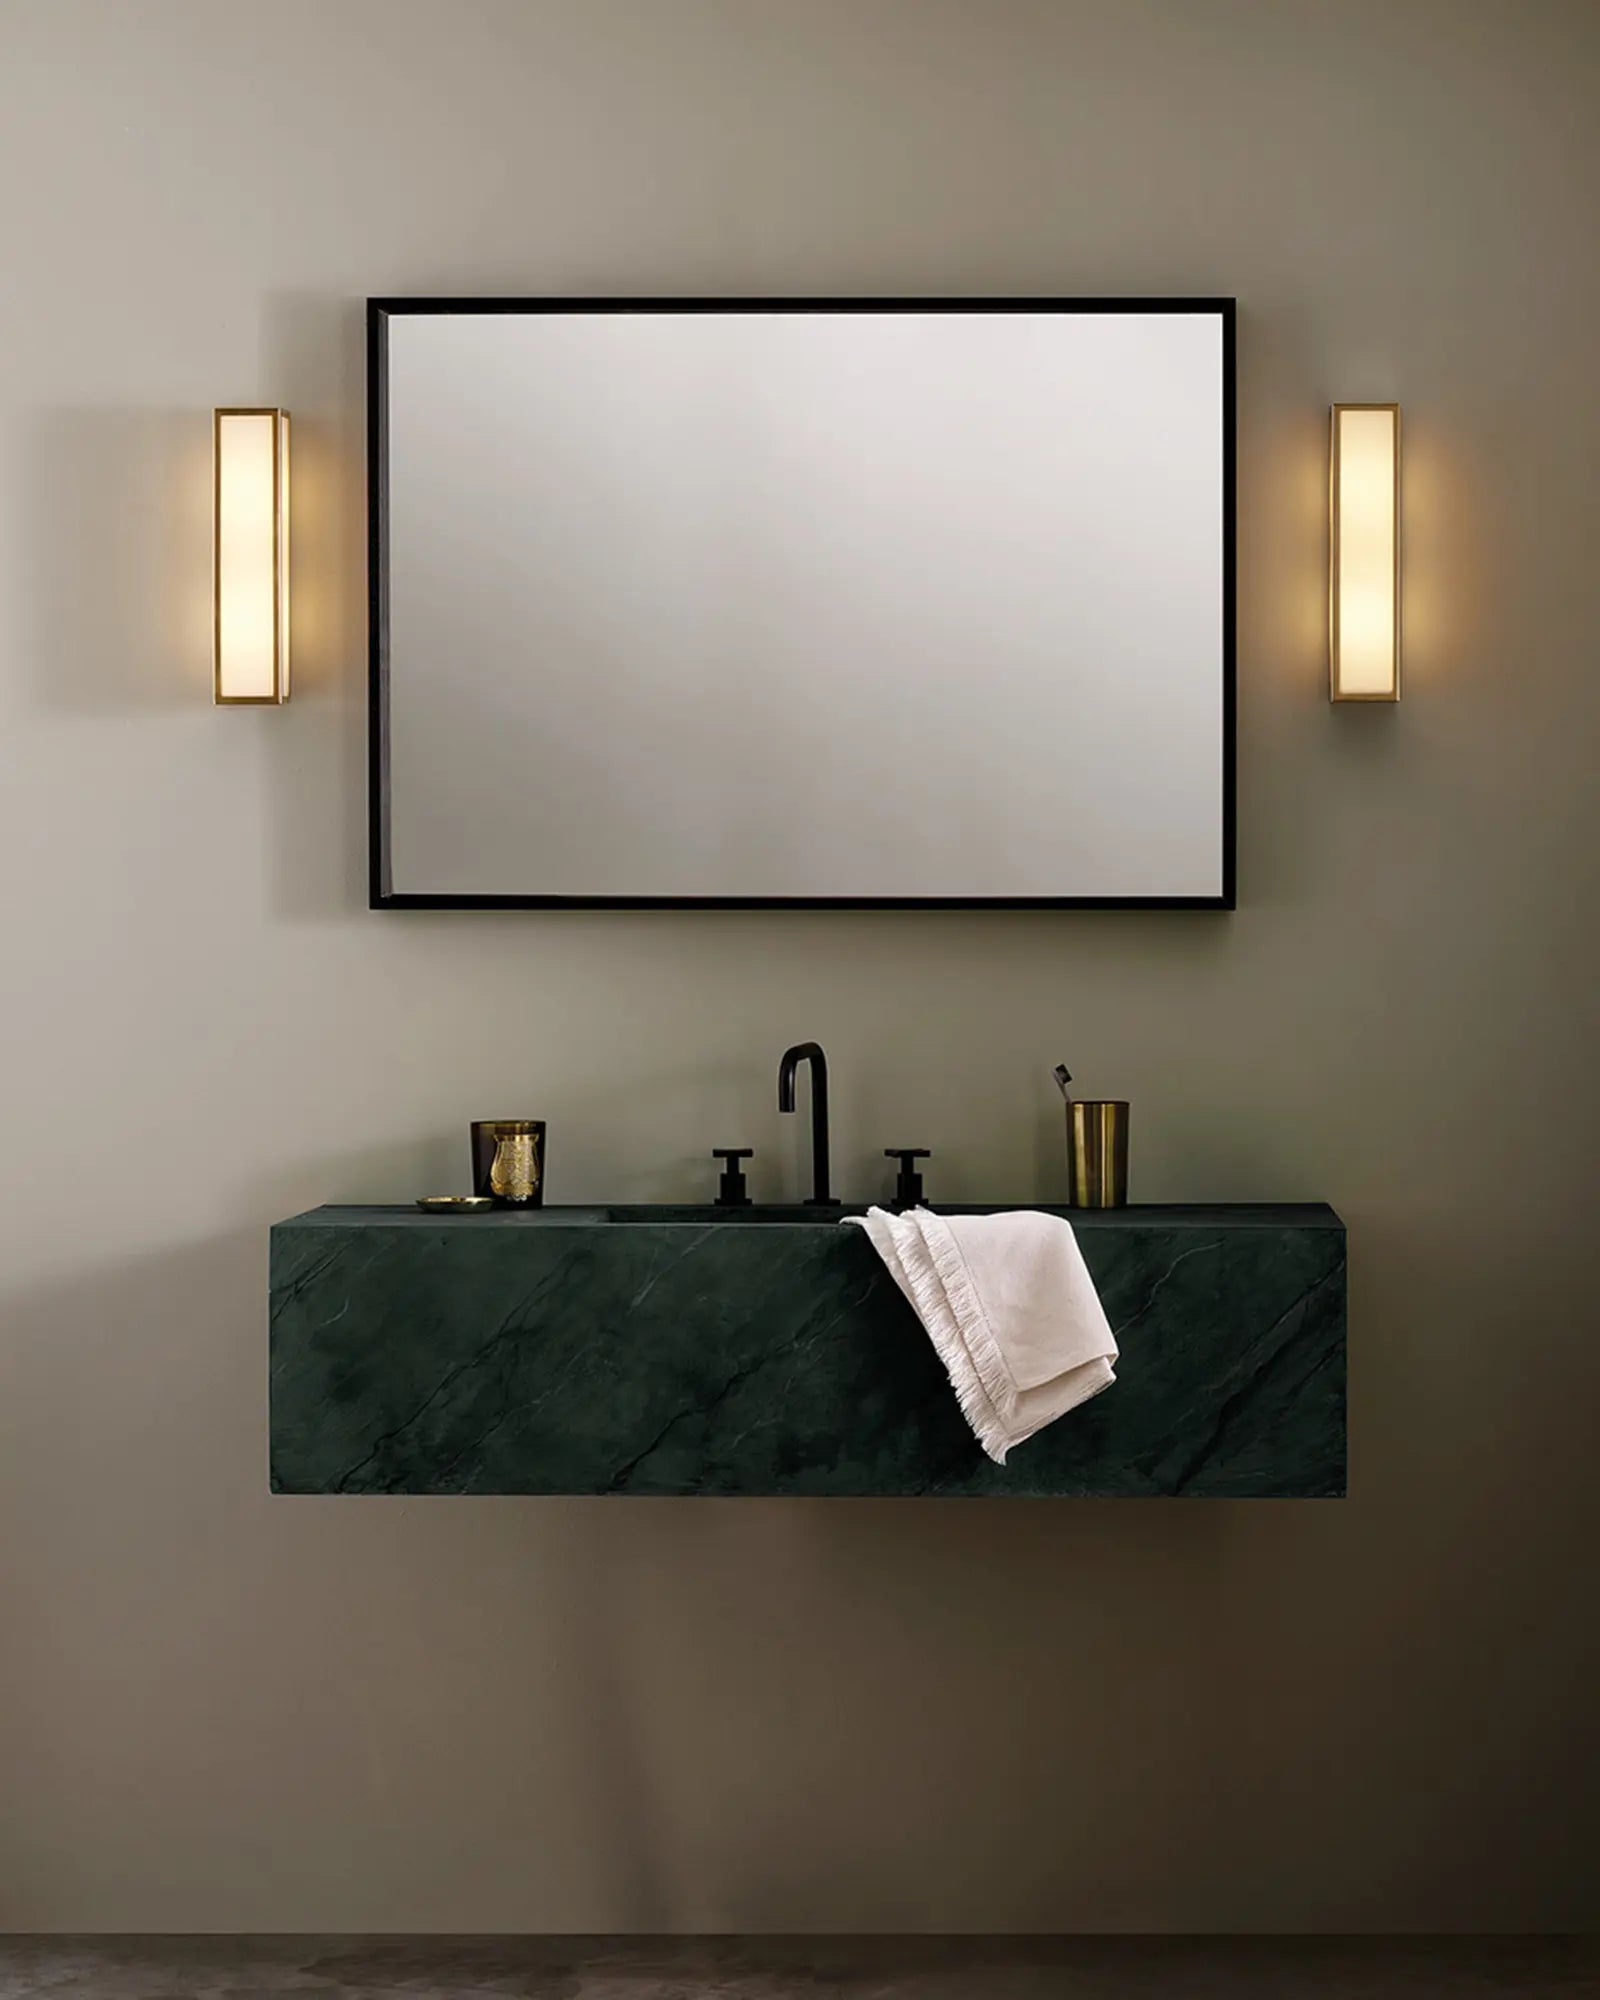 Salerno metal and opal glass rectangular contemporary wall light on the mirror's sides